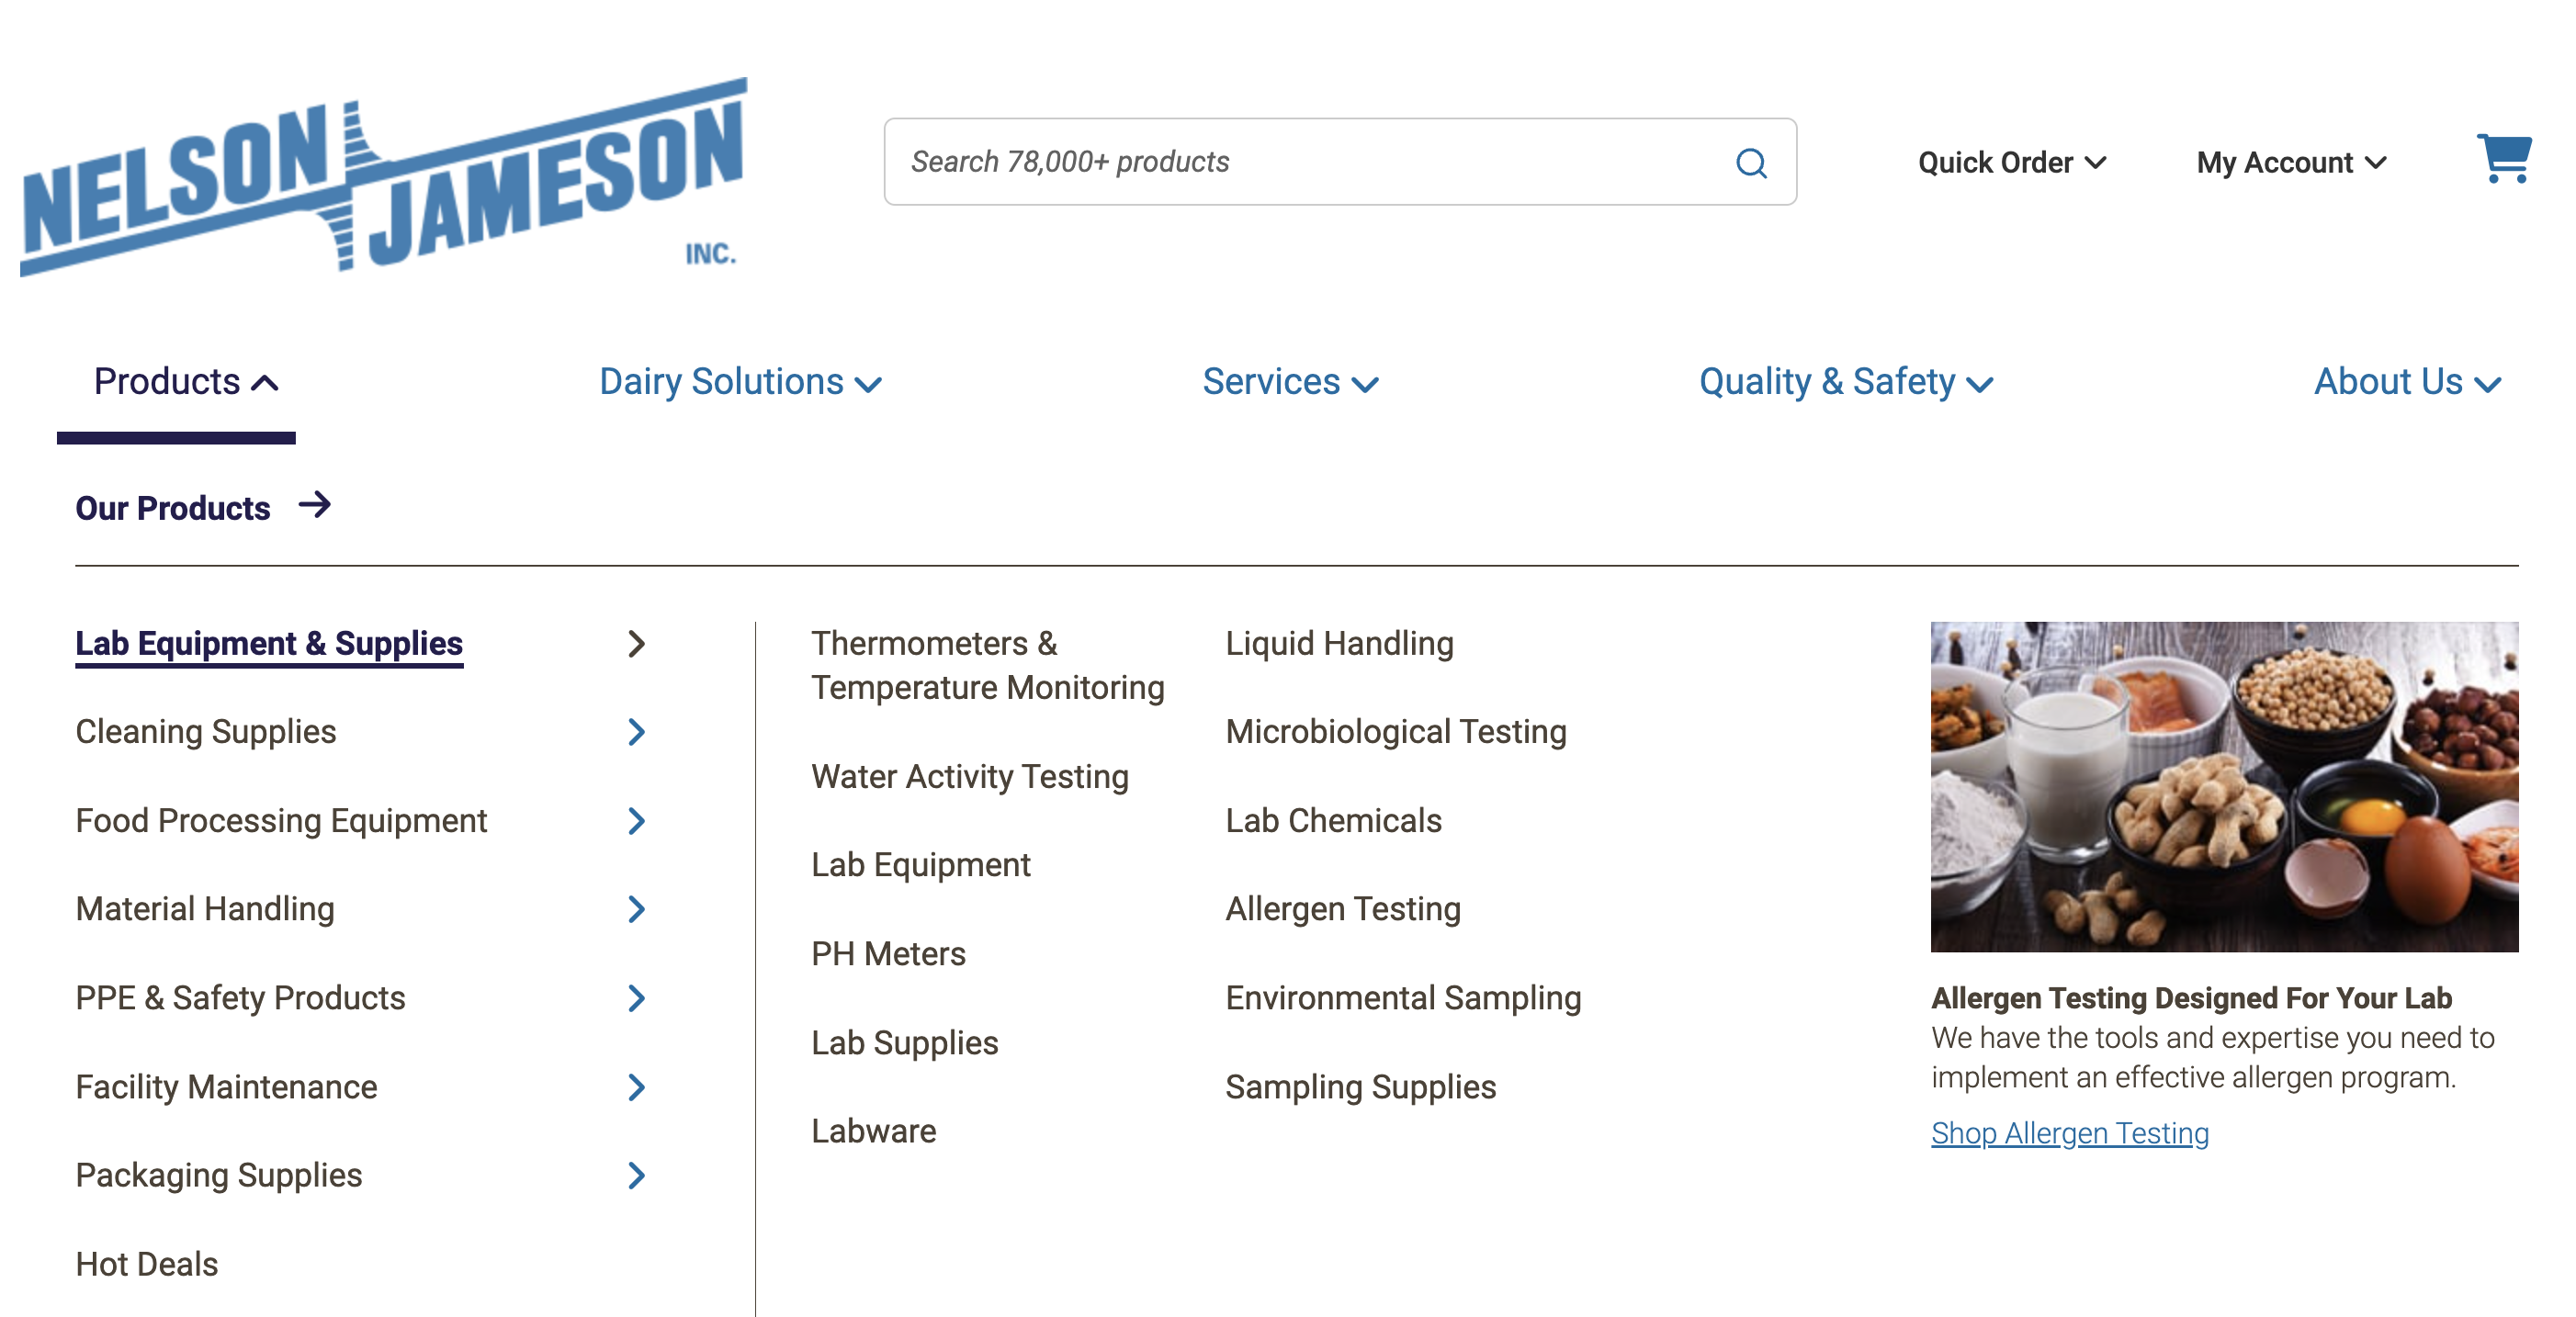 screenshot of megamenu for Nelson-Jameson's website with products selected